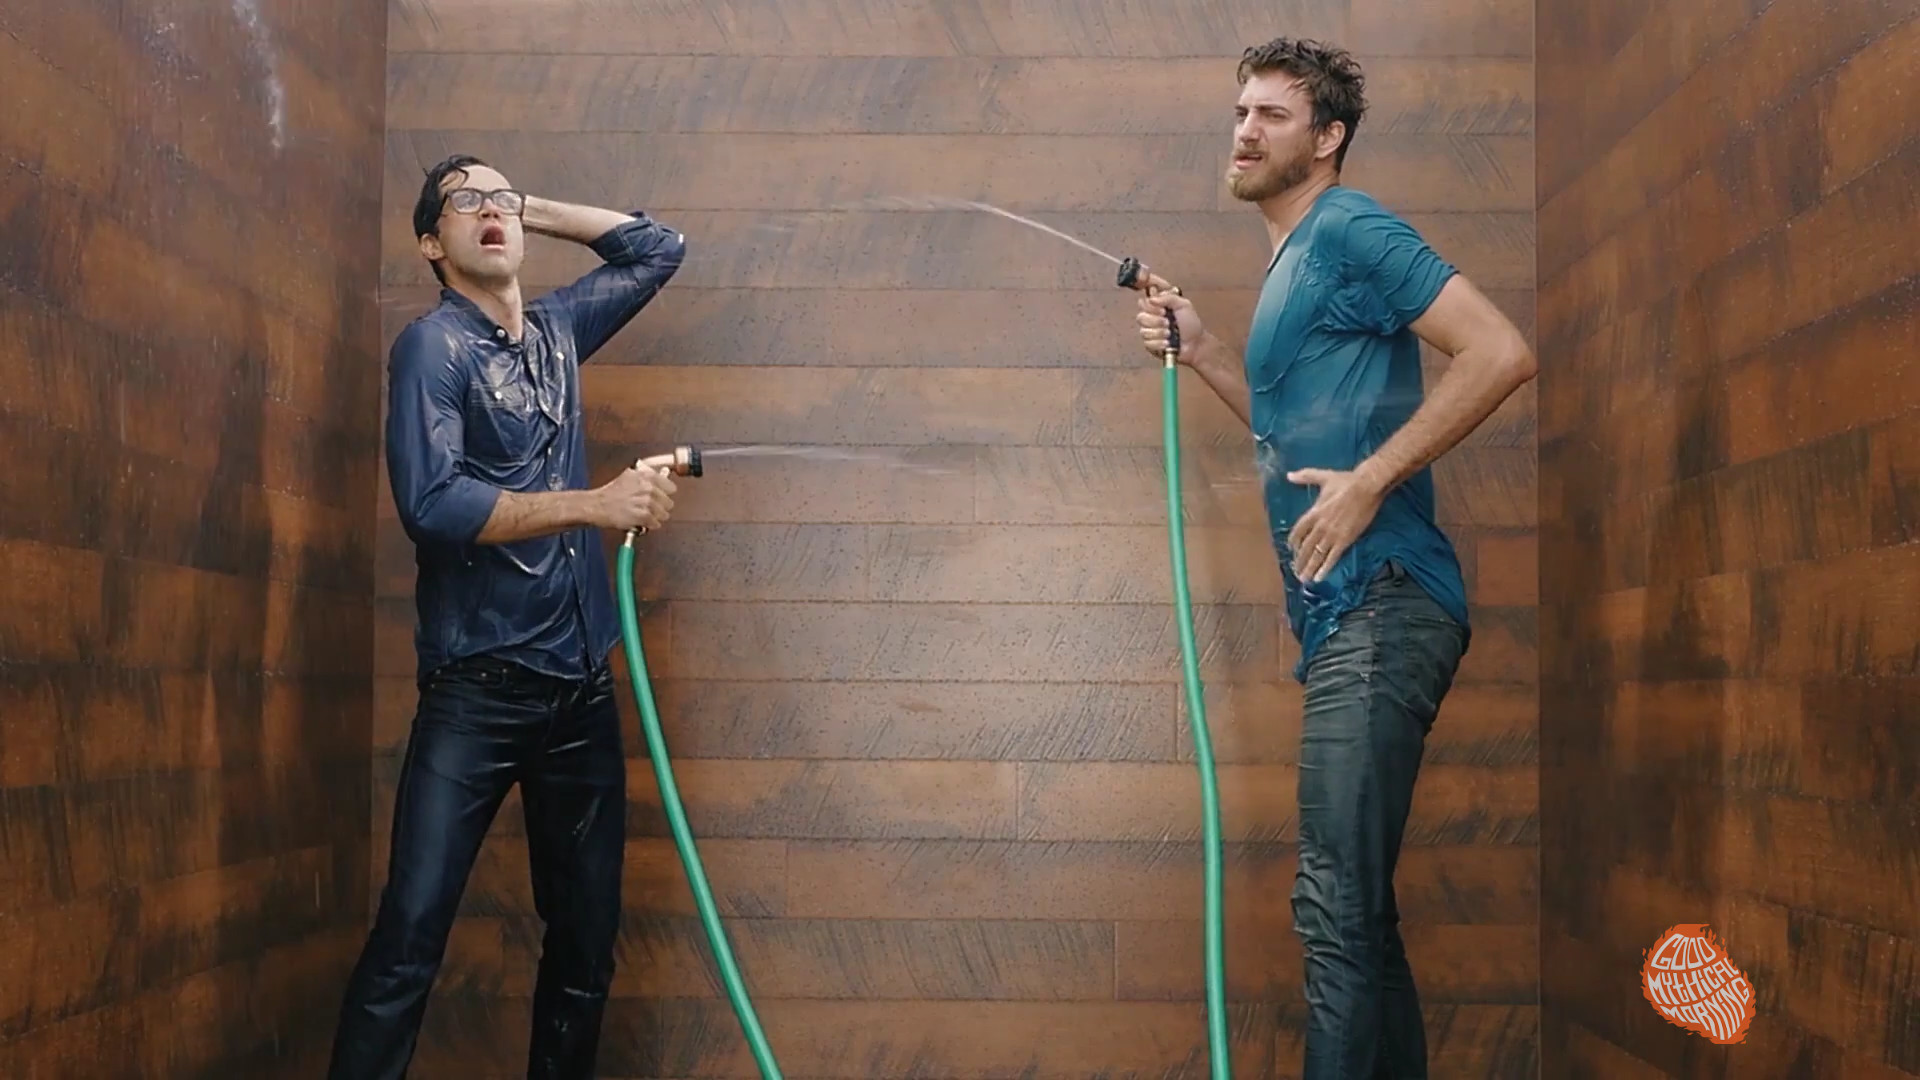 1920x1080 'Twas a good mythical morning indeed